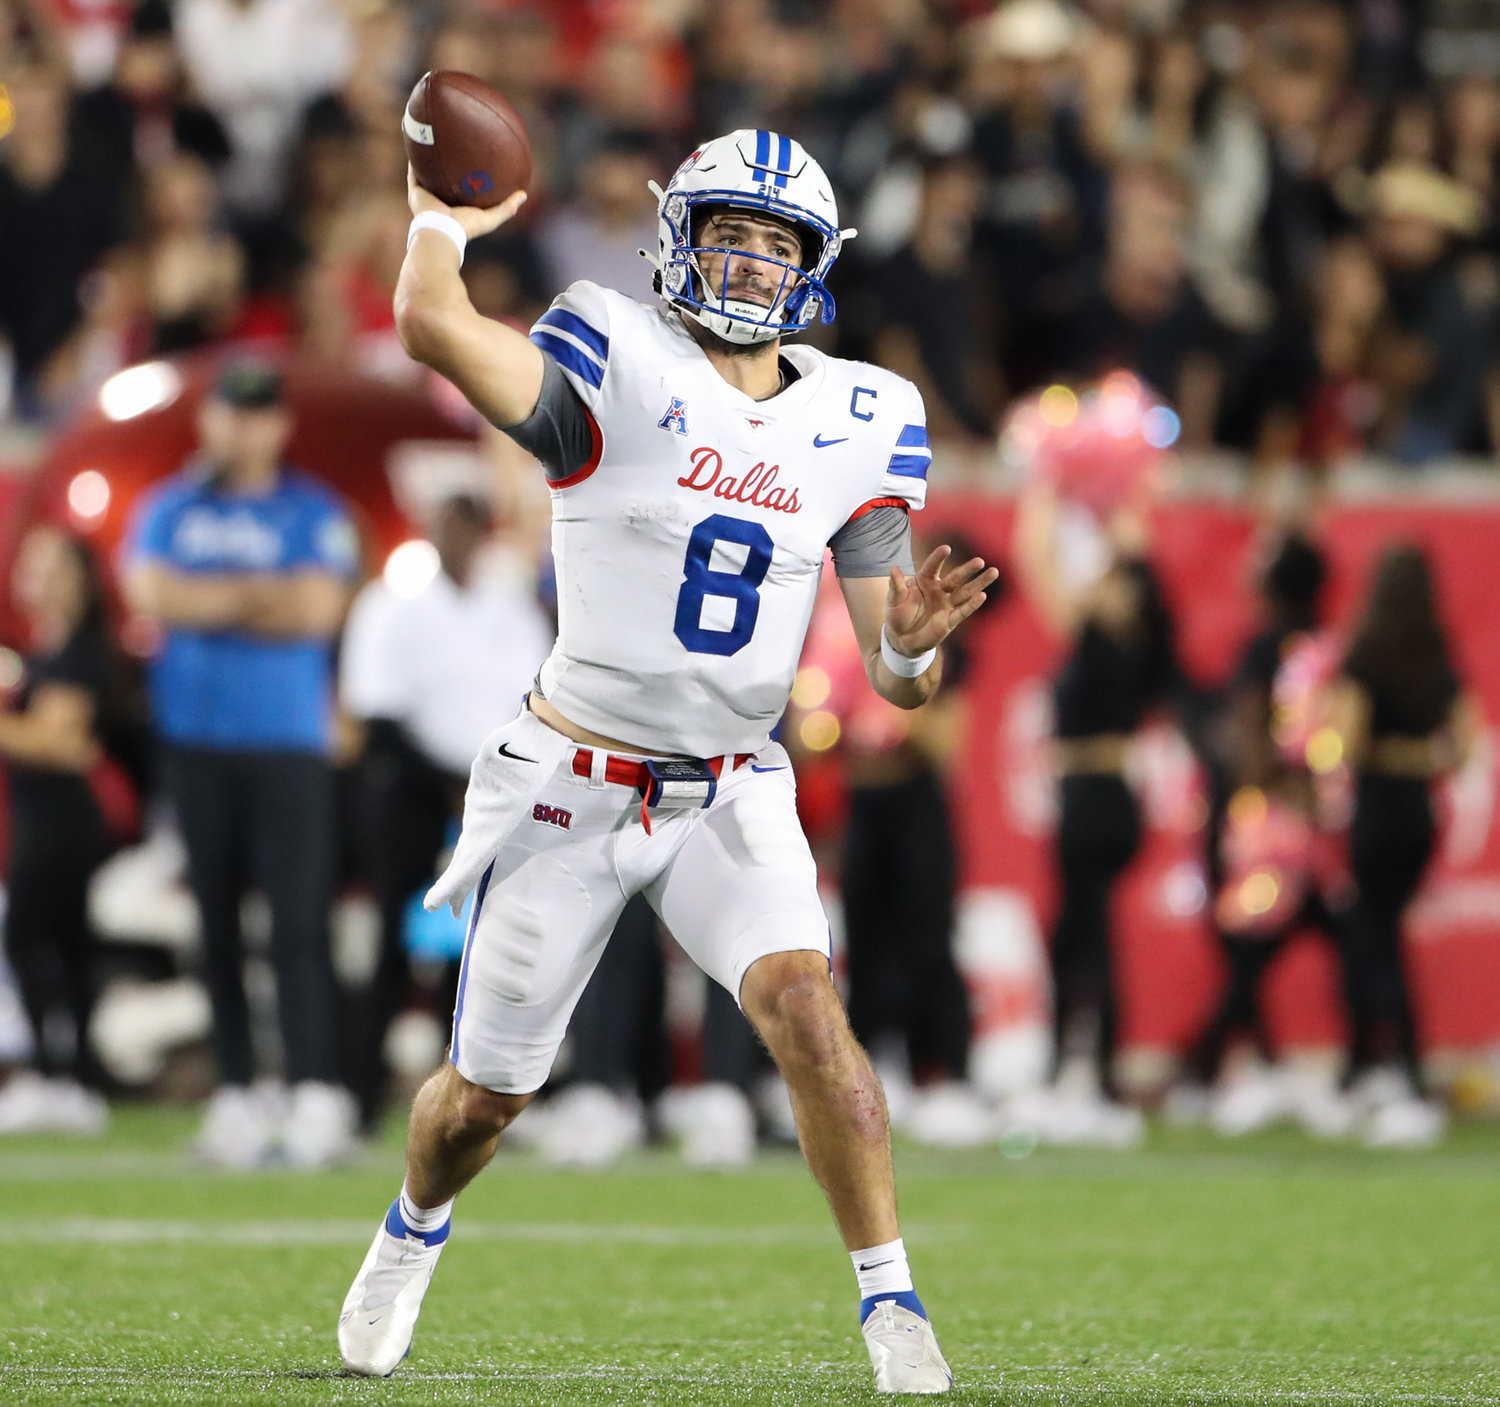 SMU Mustangs quarterback Tanner Mordecai (8) passes the ball during an NCAA football game between Houston and SMU on October 30, 2021 in Houston, Texas.